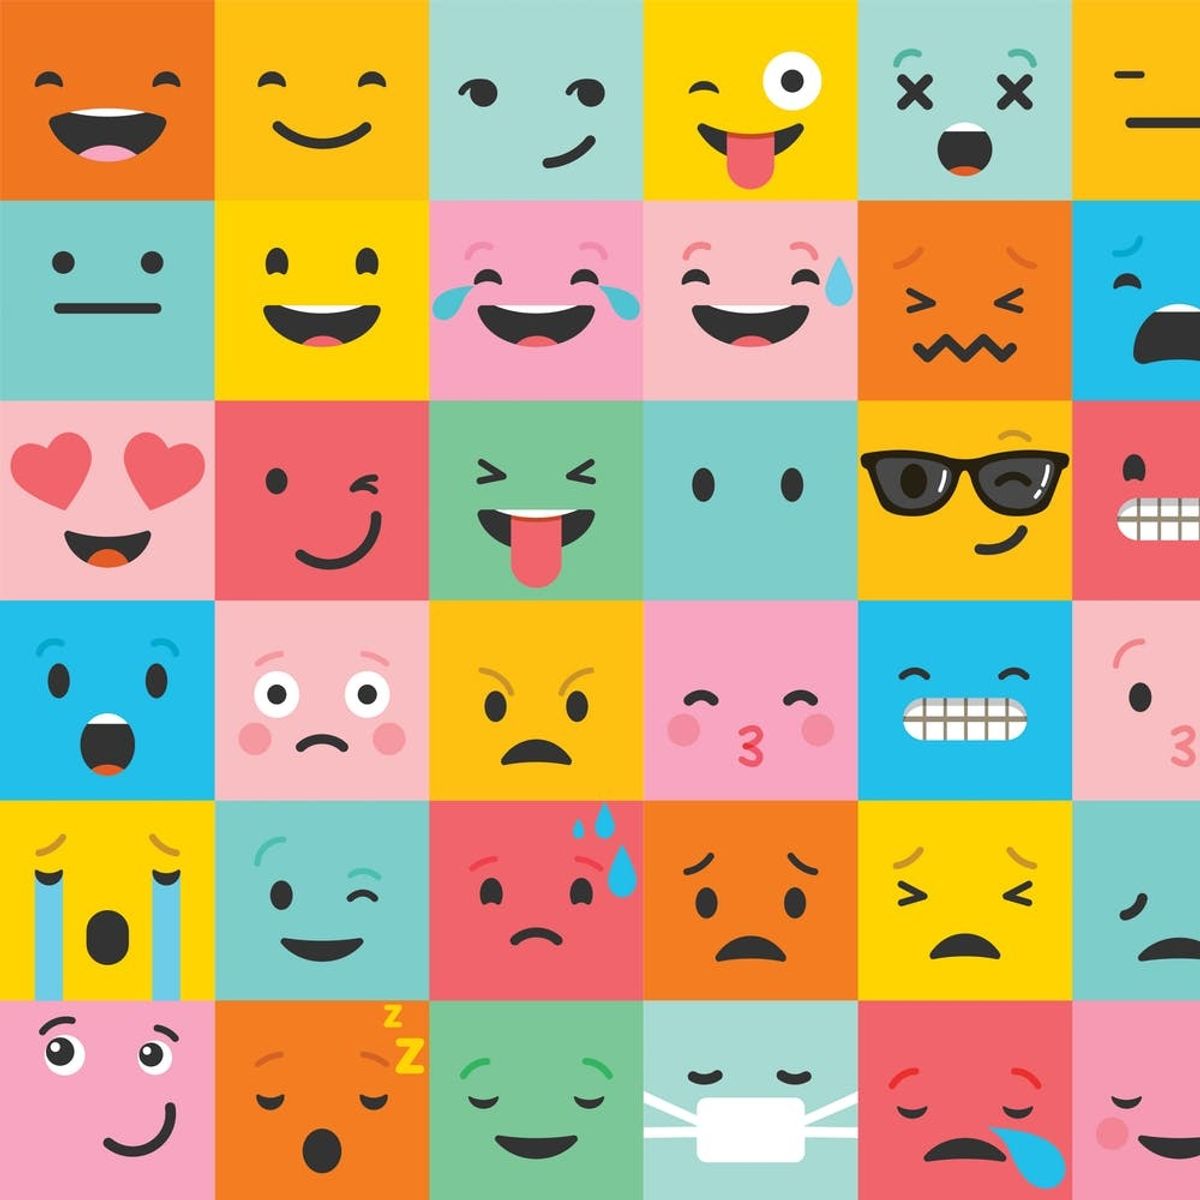 Women Communicate More Happiness and Anger Via Emoji and GIFs Than Men